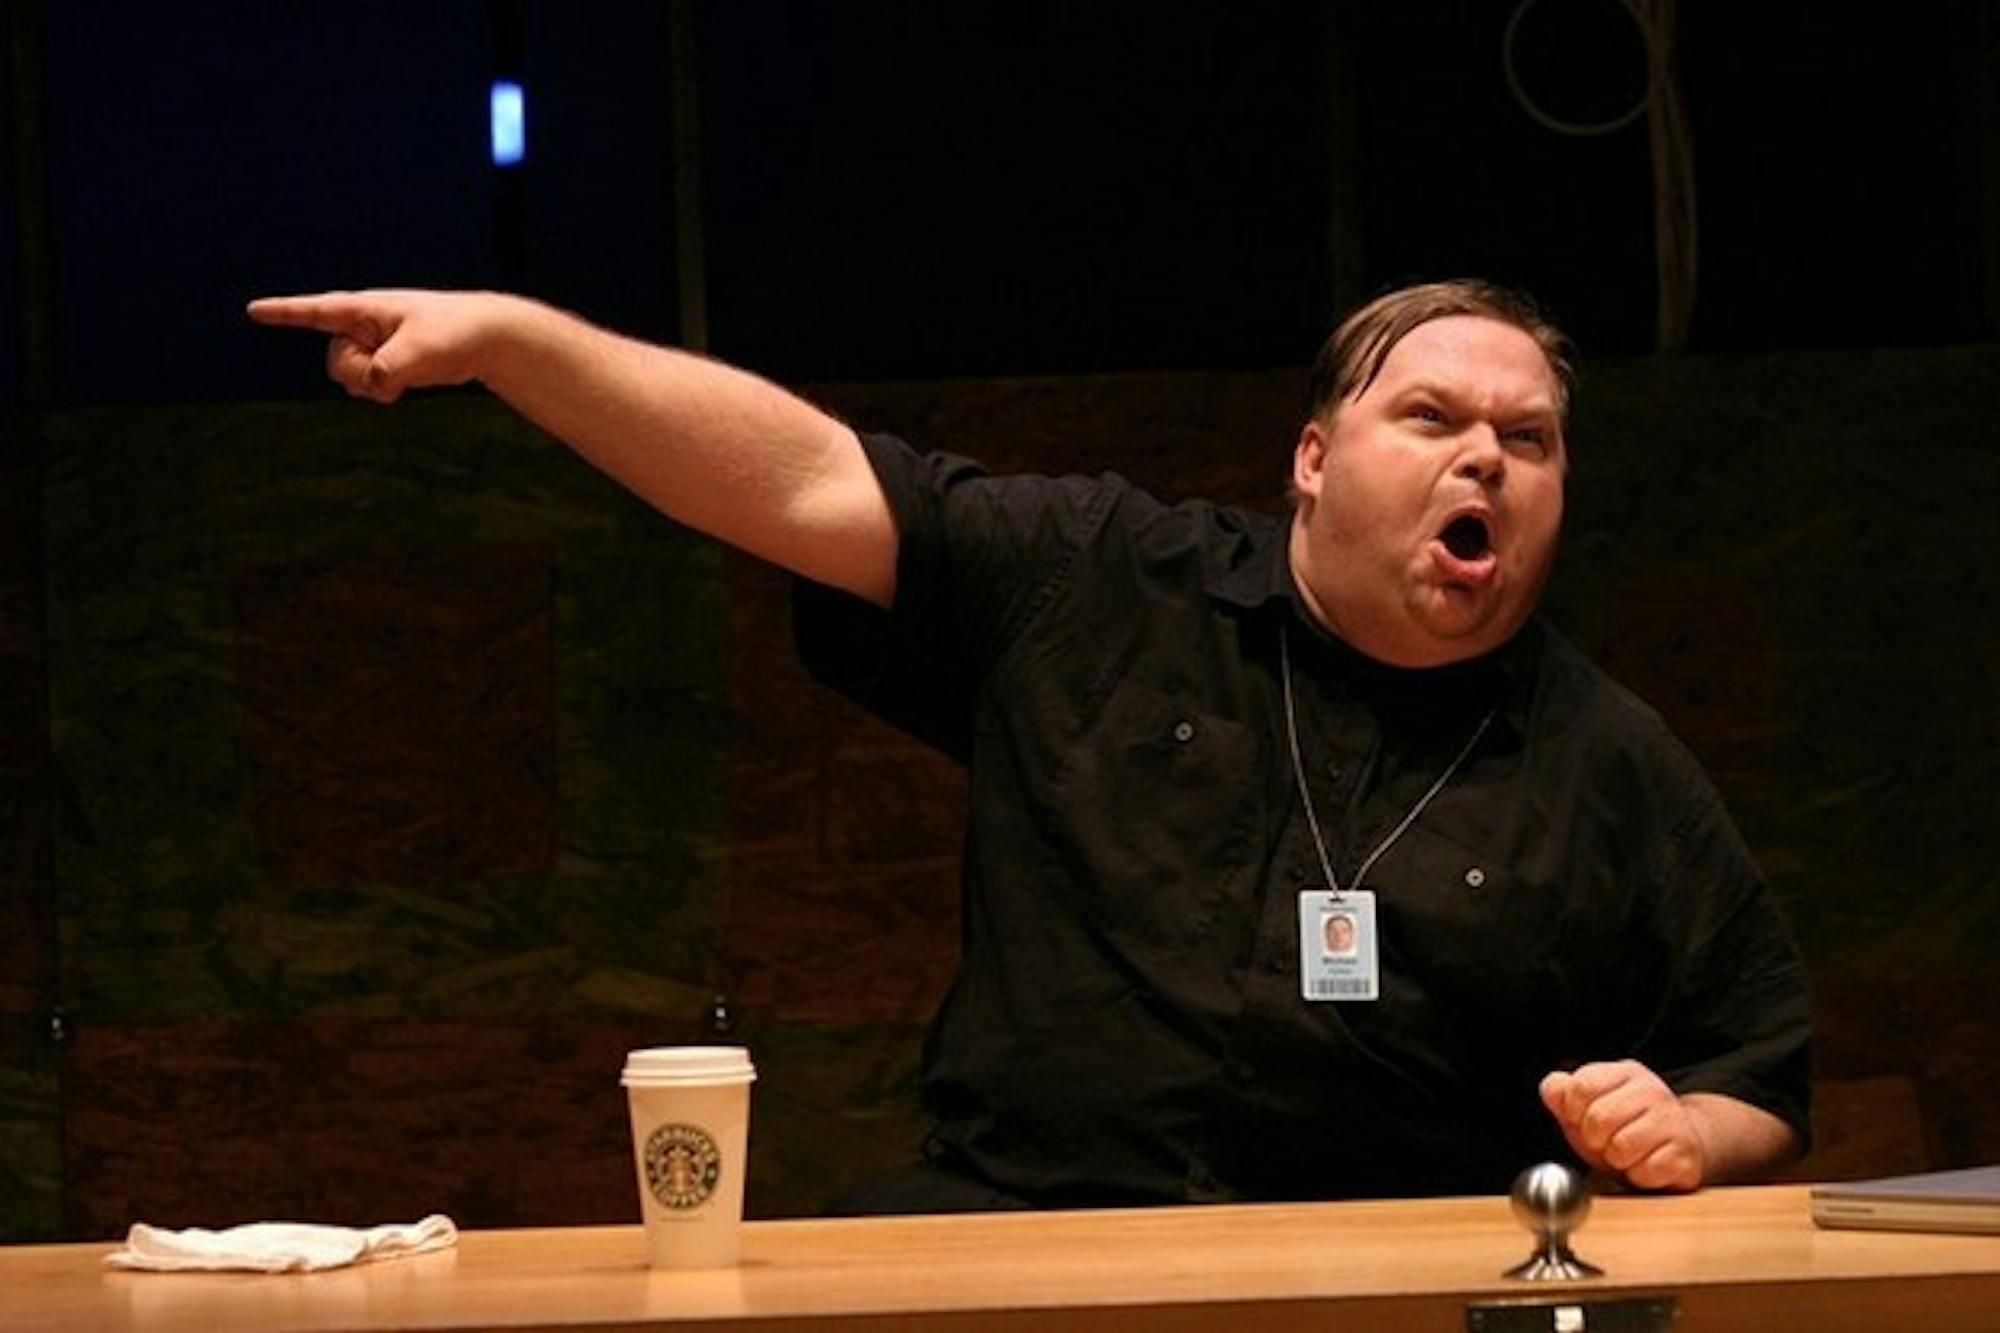 Mike Daisey recounts his misadventures as part of his performance.